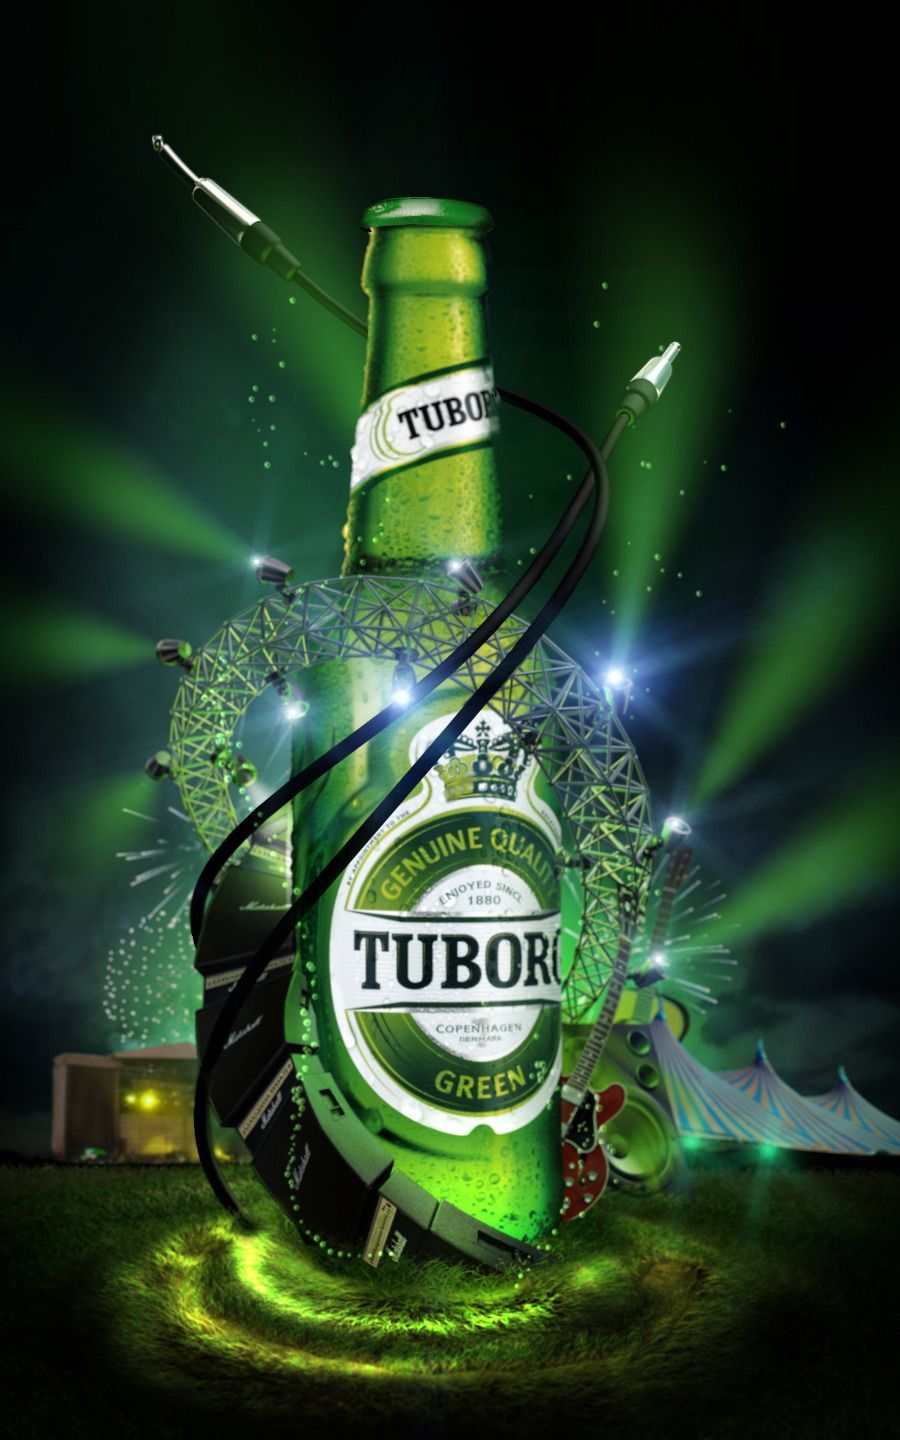 Tuborg Rebrand 'Festival' By Paul Clements. Beer